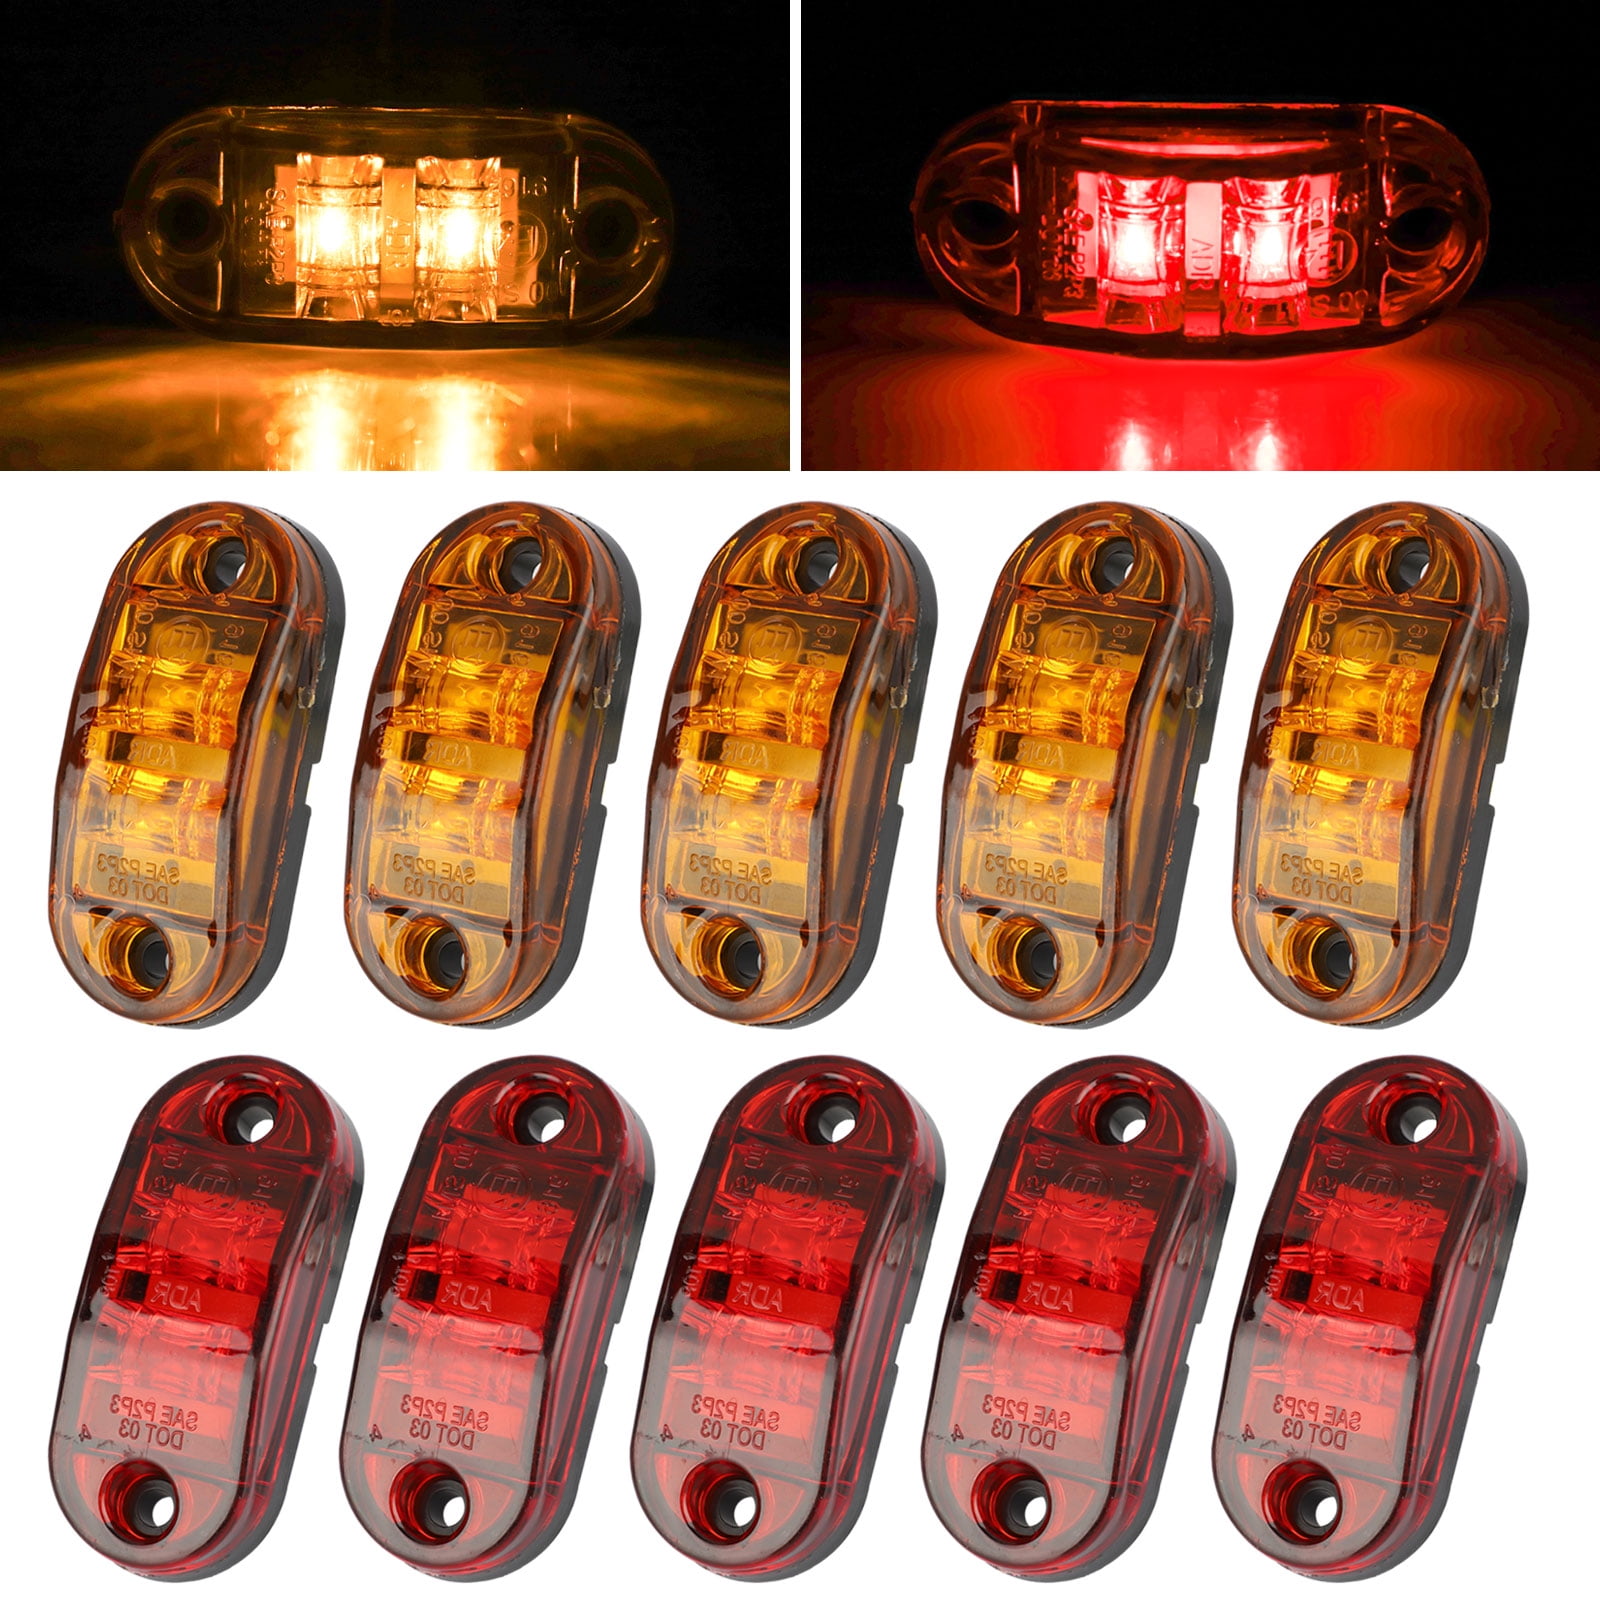 10x EASY FIT AMBER LED SIDE MARKER LAMPS/LIGHTS TRUCK VAN BAR **NO CUT OUT**